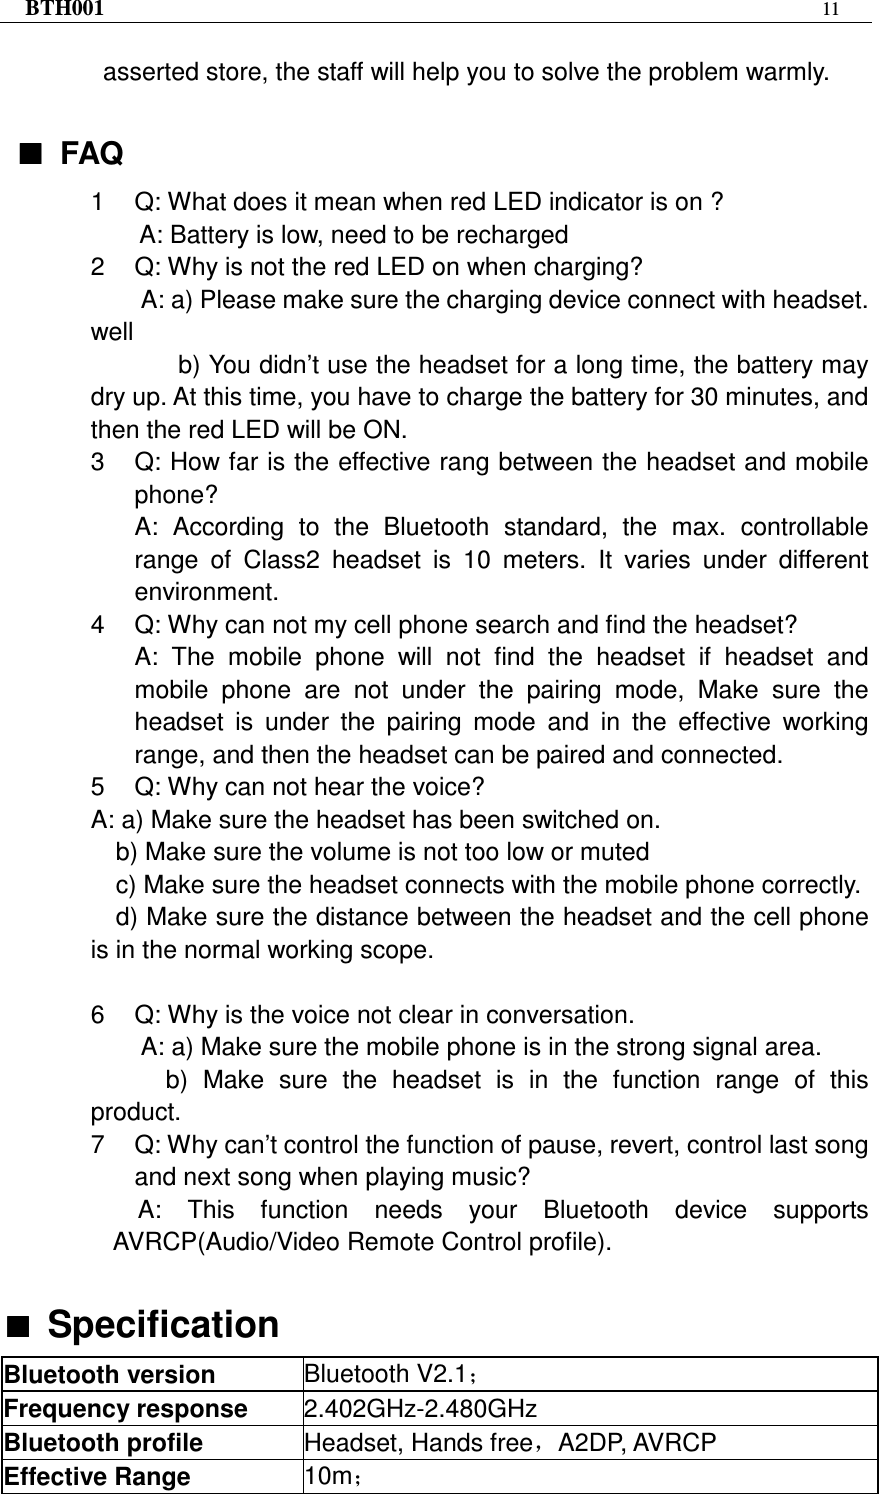 BTH001  11   asserted store, the staff will help you to solve the problem warmly.  ■■■■ FAQ 1  Q: What does it mean when red LED indicator is on ? A: Battery is low, need to be recharged   2  Q: Why is not the red LED on when charging? A: a) Please make sure the charging device connect with headset. well   b) You didn’t use the headset for a long time, the battery may dry up. At this time, you have to charge the battery for 30 minutes, and then the red LED will be ON. 3  Q: How far is the effective rang between the headset and mobile phone? A:  According  to  the  Bluetooth  standard,  the  max.  controllable range  of  Class2  headset  is  10  meters.  It  varies  under  different environment. 4  Q: Why can not my cell phone search and find the headset? A:  The  mobile  phone  will  not  find  the  headset  if  headset  and mobile  phone  are  not  under  the  pairing  mode,  Make  sure  the headset  is  under  the  pairing  mode  and  in  the  effective  working range, and then the headset can be paired and connected. 5  Q: Why can not hear the voice? A: a) Make sure the headset has been switched on.     b) Make sure the volume is not too low or muted c) Make sure the headset connects with the mobile phone correctly. d) Make sure the distance between the headset and the cell phone is in the normal working scope.  6  Q: Why is the voice not clear in conversation.   A: a) Make sure the mobile phone is in the strong signal area. b)  Make  sure  the  headset  is  in  the  function  range  of  this product. 7  Q: Why can’t control the function of pause, revert, control last song and next song when playing music? A:  This  function  needs  your  Bluetooth  device  supports AVRCP(Audio/Video Remote Control profile).  ■■■■ Specification Bluetooth version  Bluetooth V2.1； Frequency response  2.402GHz-2.480GHz Bluetooth profile  Headset, Hands free，A2DP, AVRCP Effective Range  10m； 